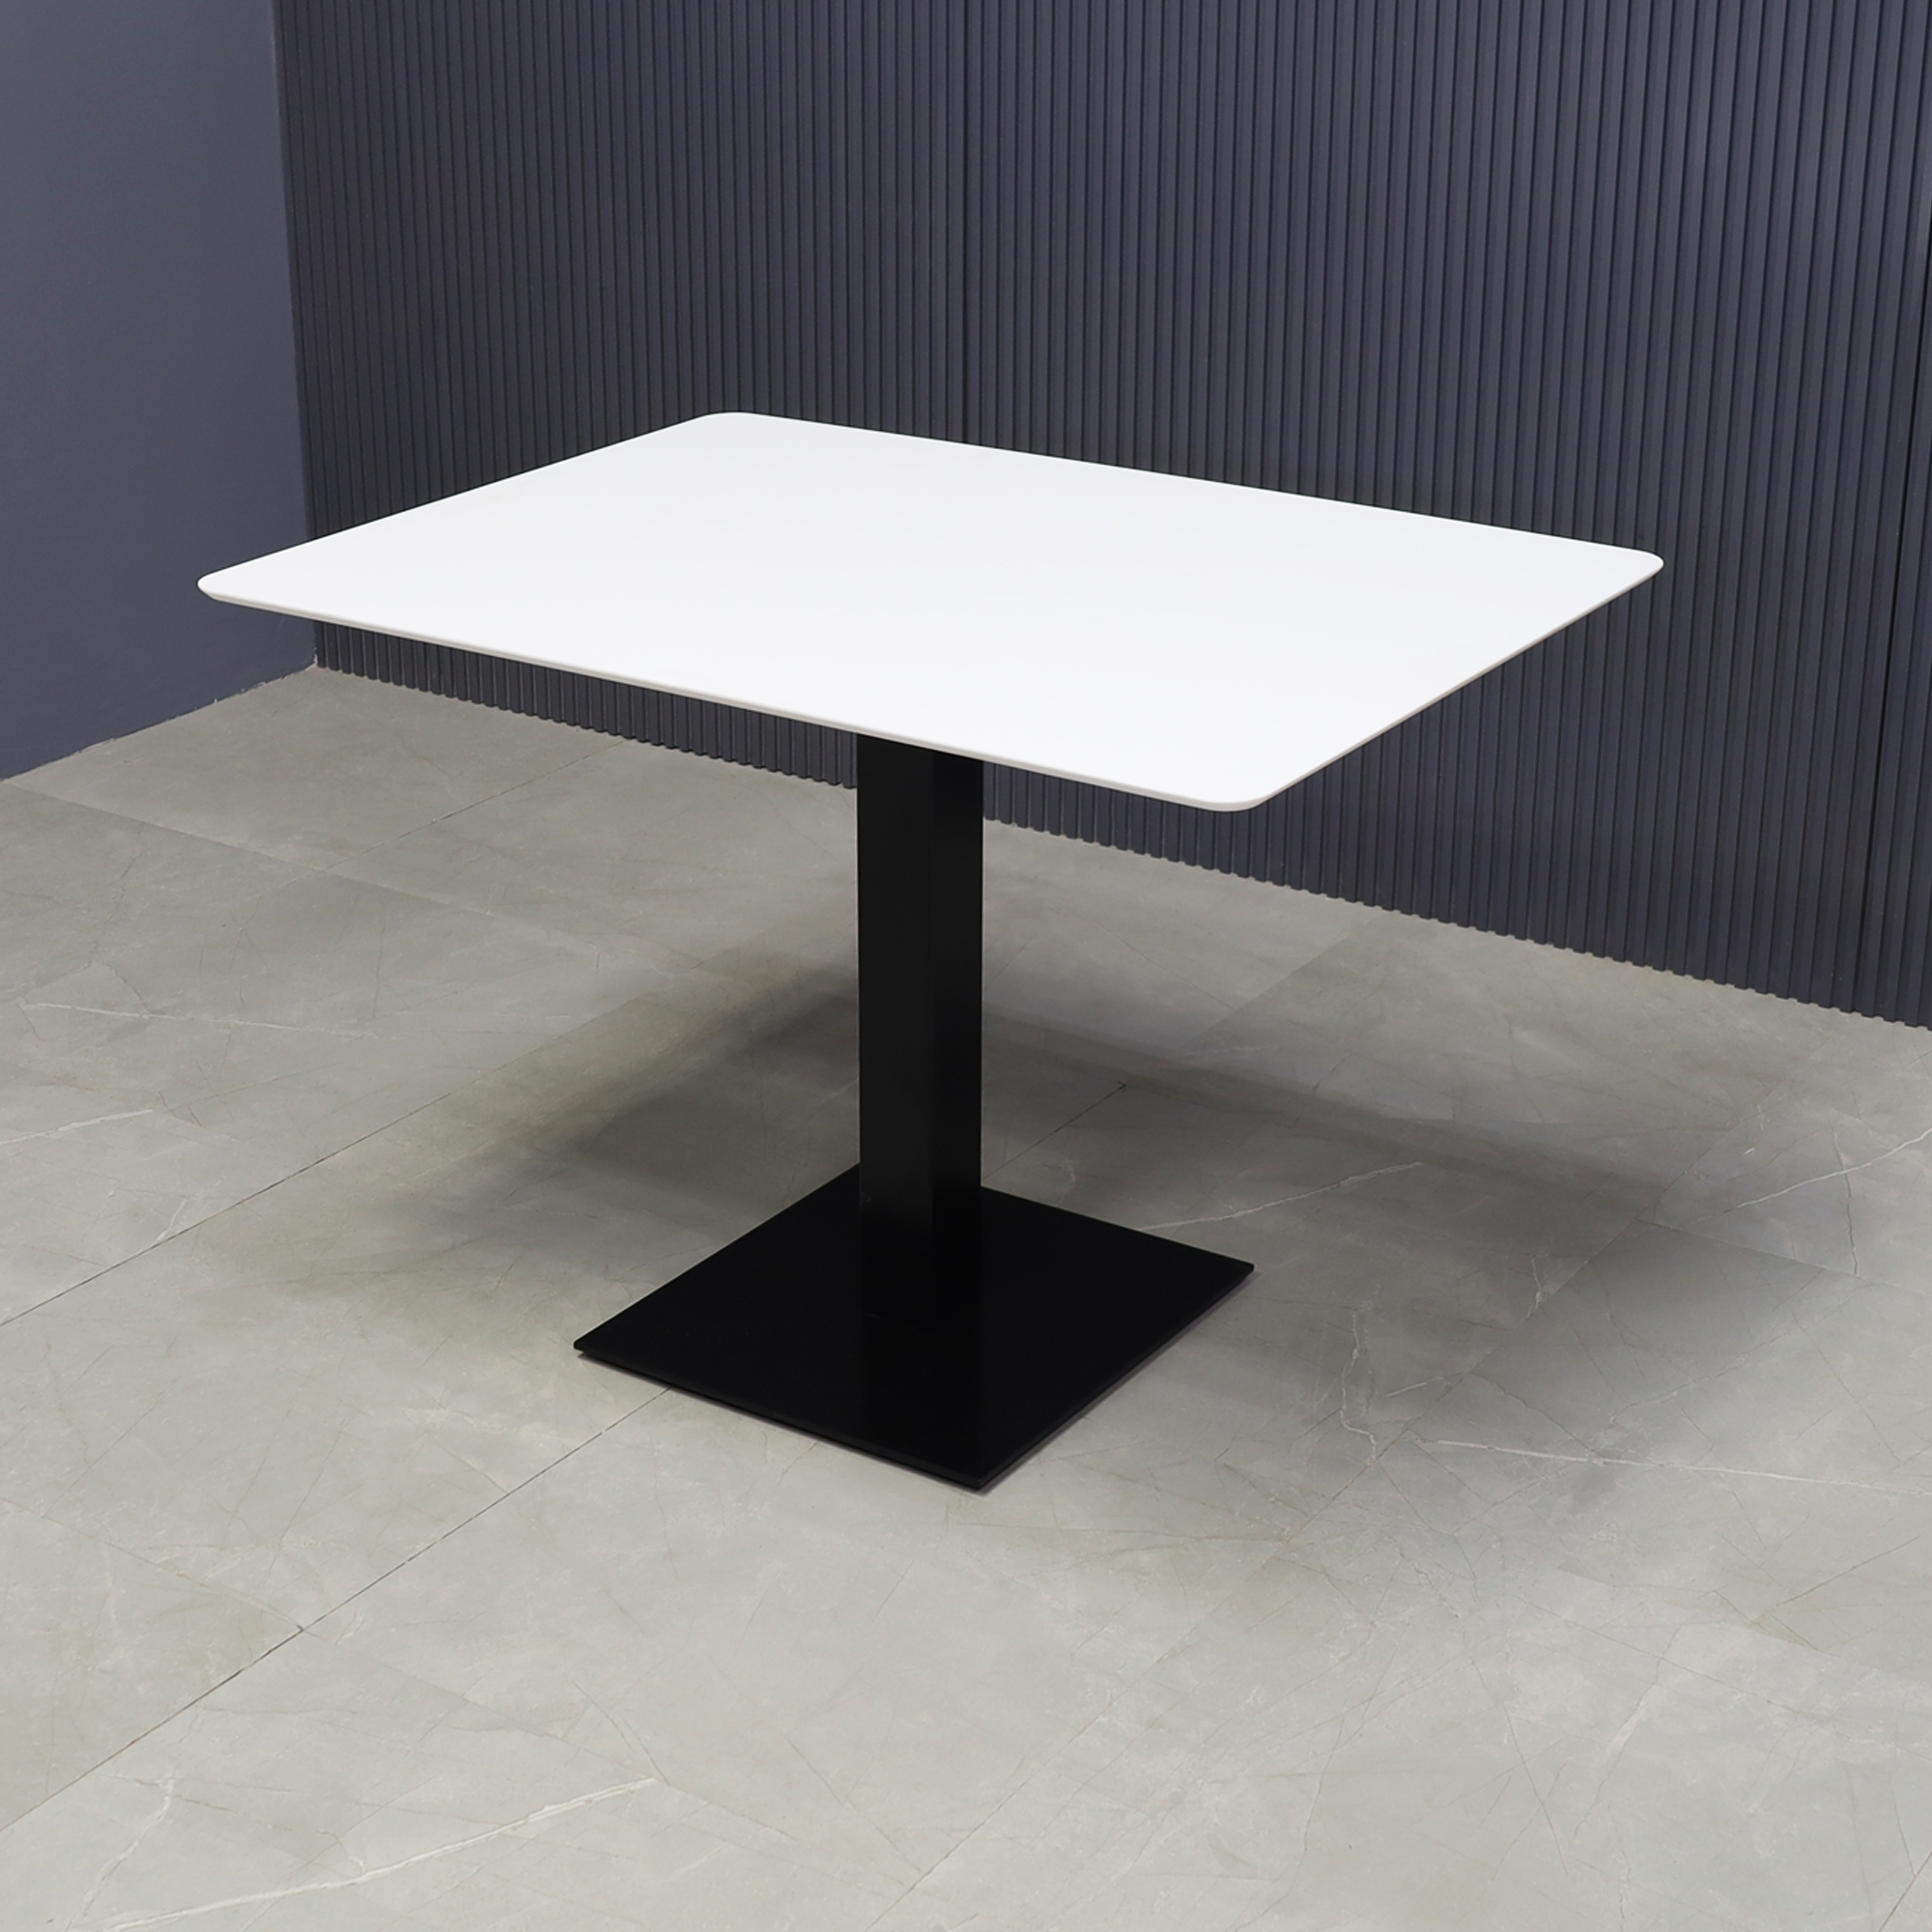 42-inch California Rectangular Conference/Meeting Table in white solid engineered stone top and black brushed stainless base shown here.